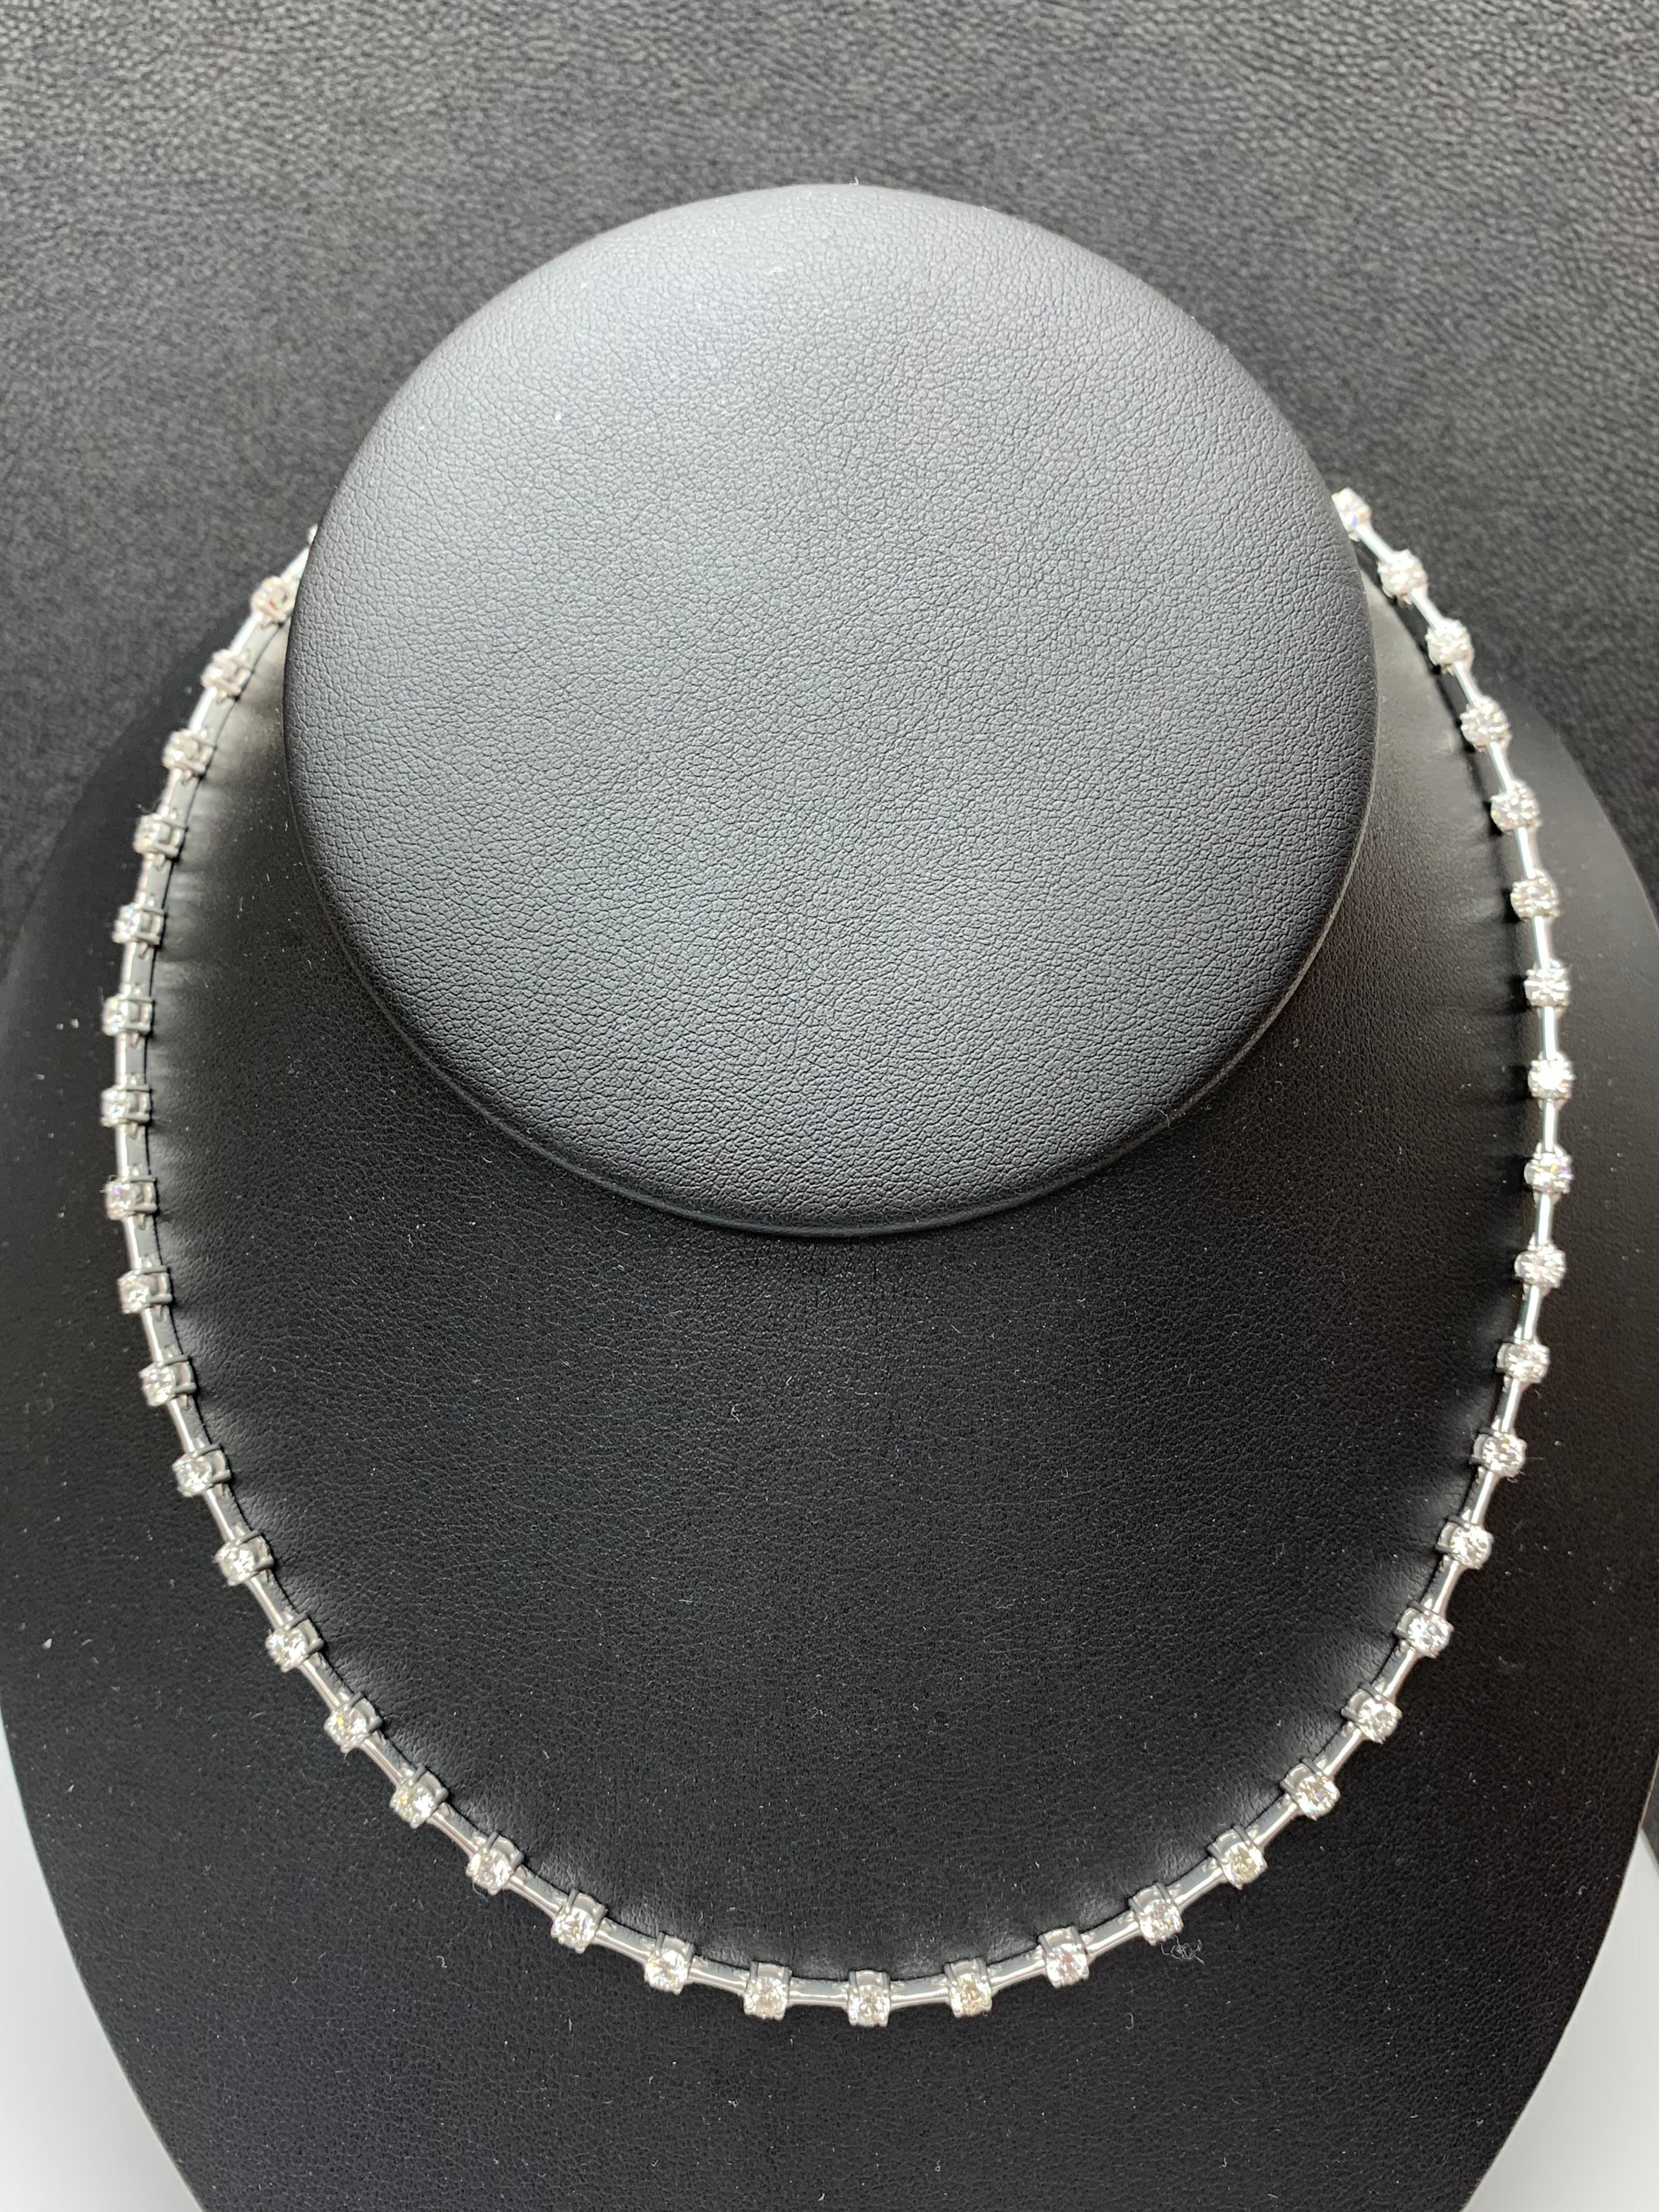 A brilliant jewelry piece showcasing 8.13 carats total of brilliant cut 53 round diamonds. Made with 14K White Gold. Diamond by the Yard Necklace.
(Customized and sizable for the desired length)

Style is available in different price ranges. Prices